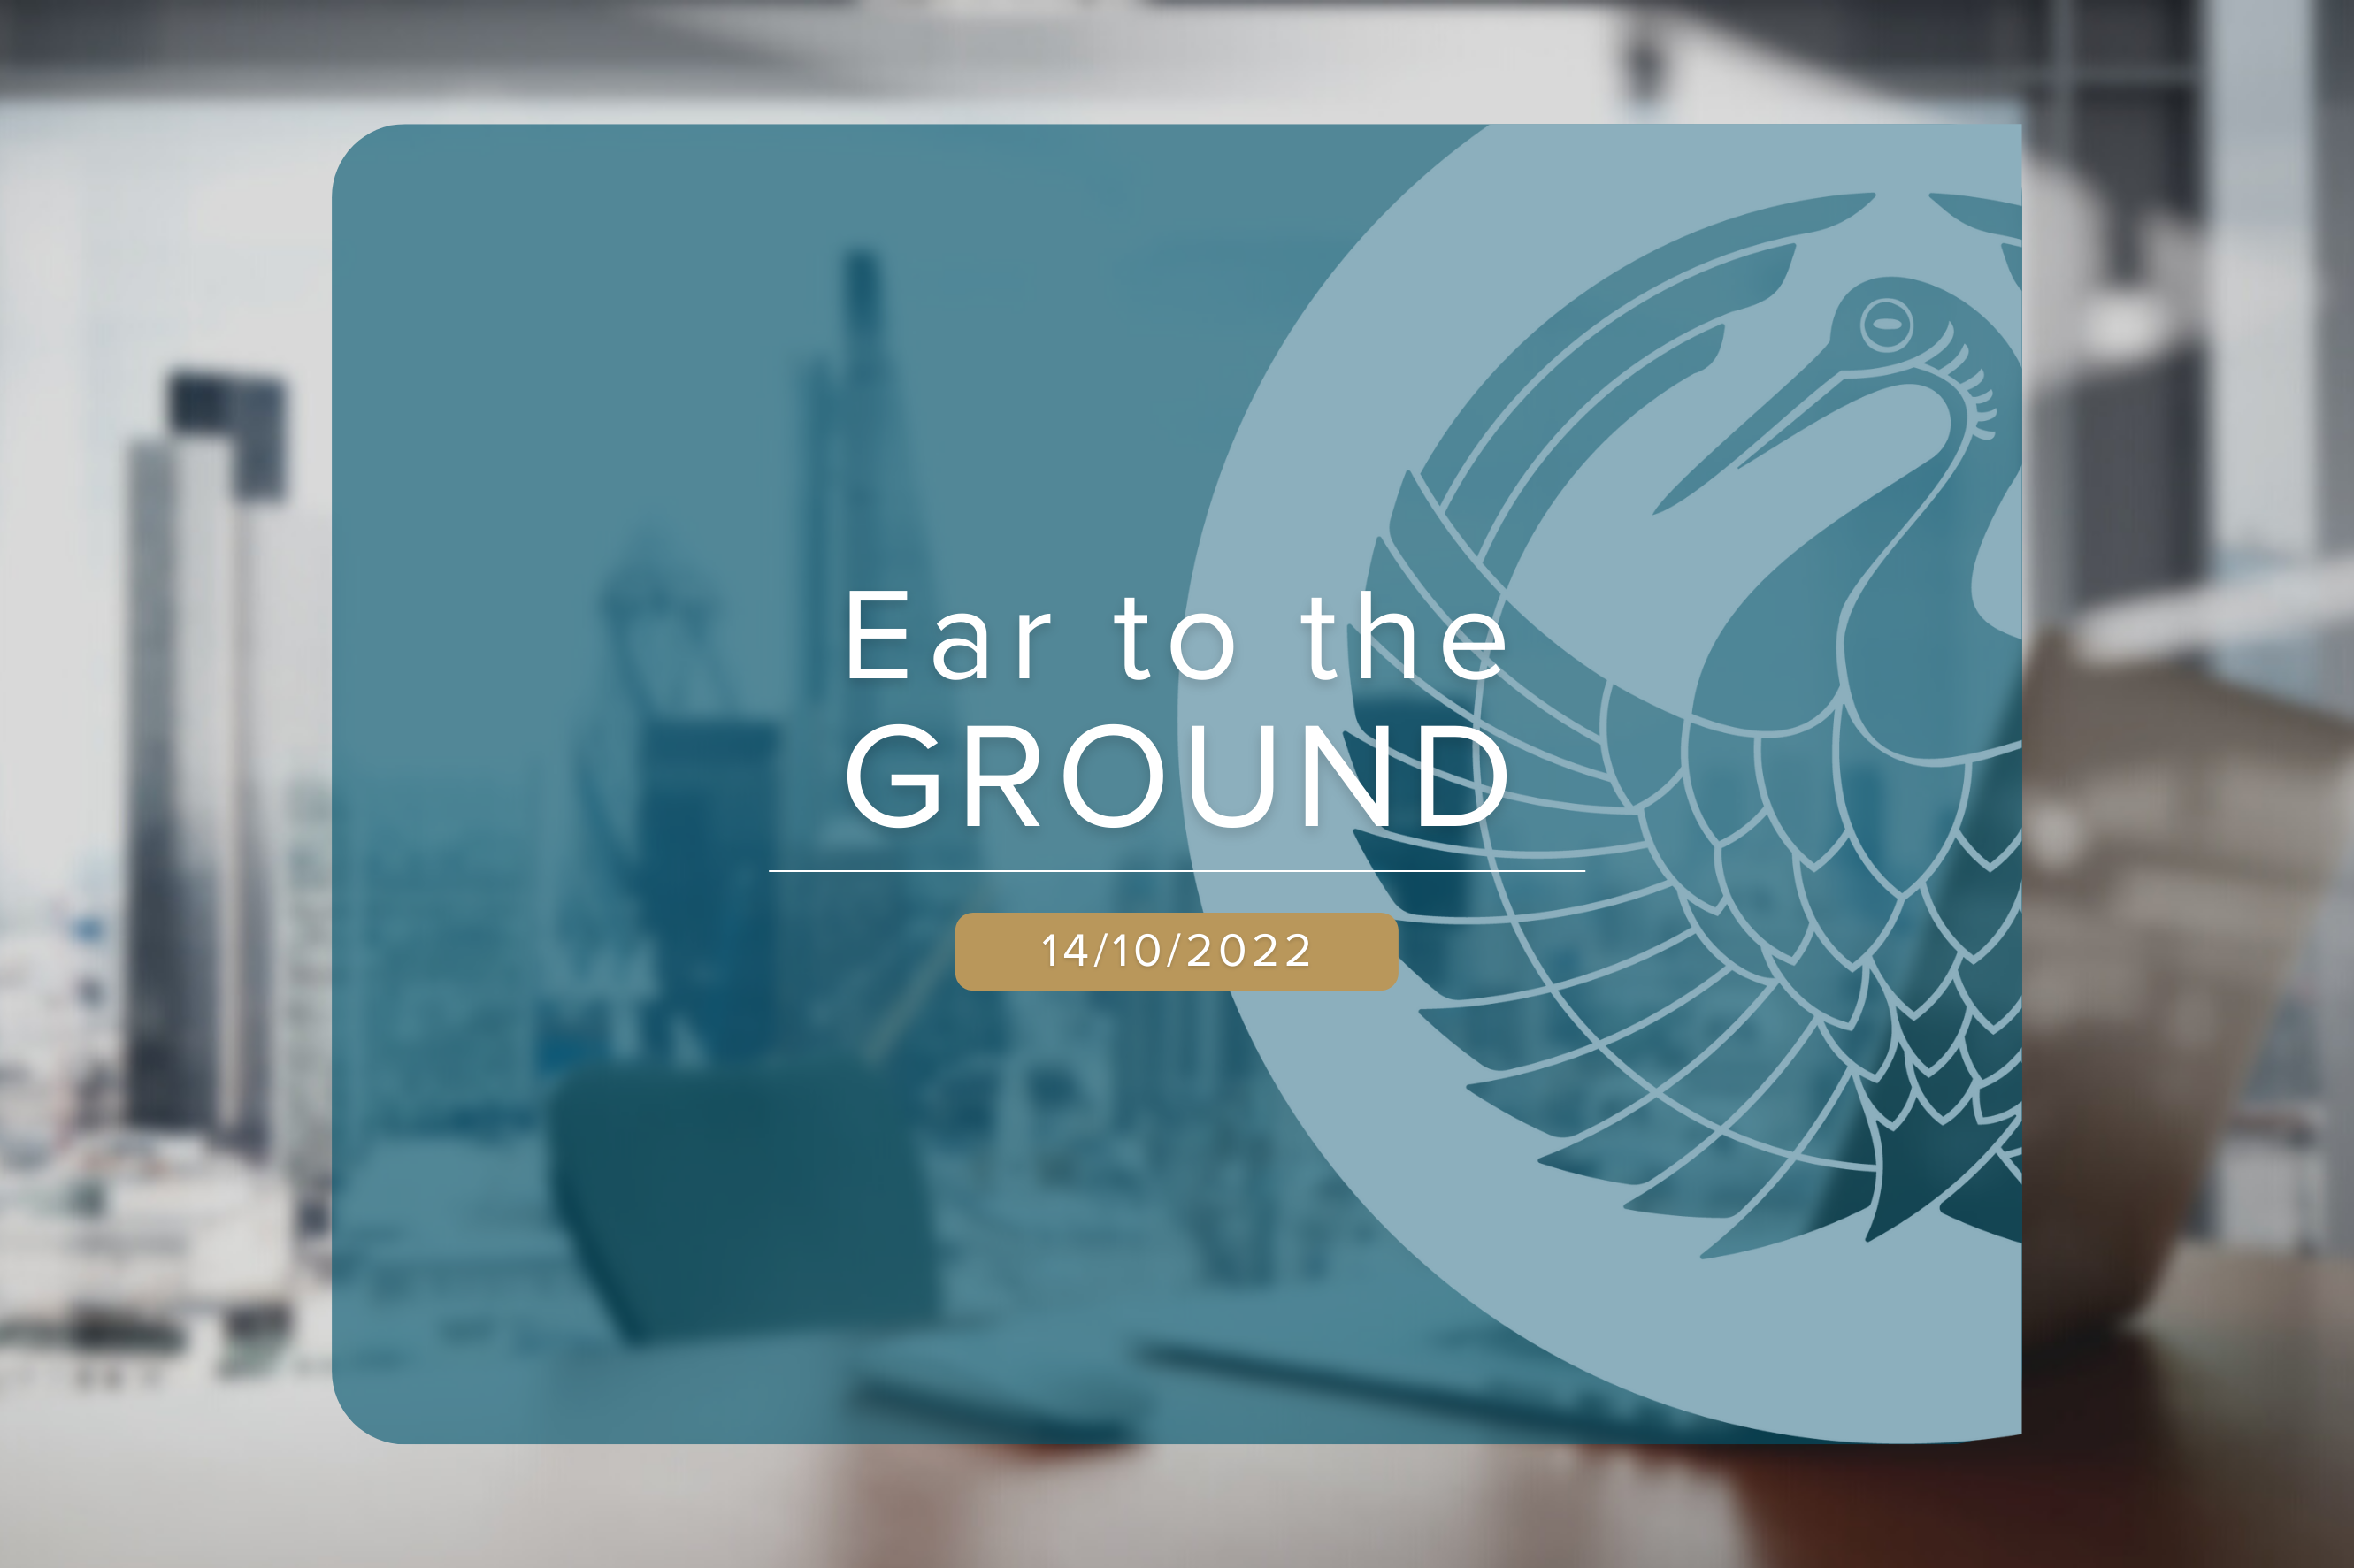 Ear to the ground 14/10/2022